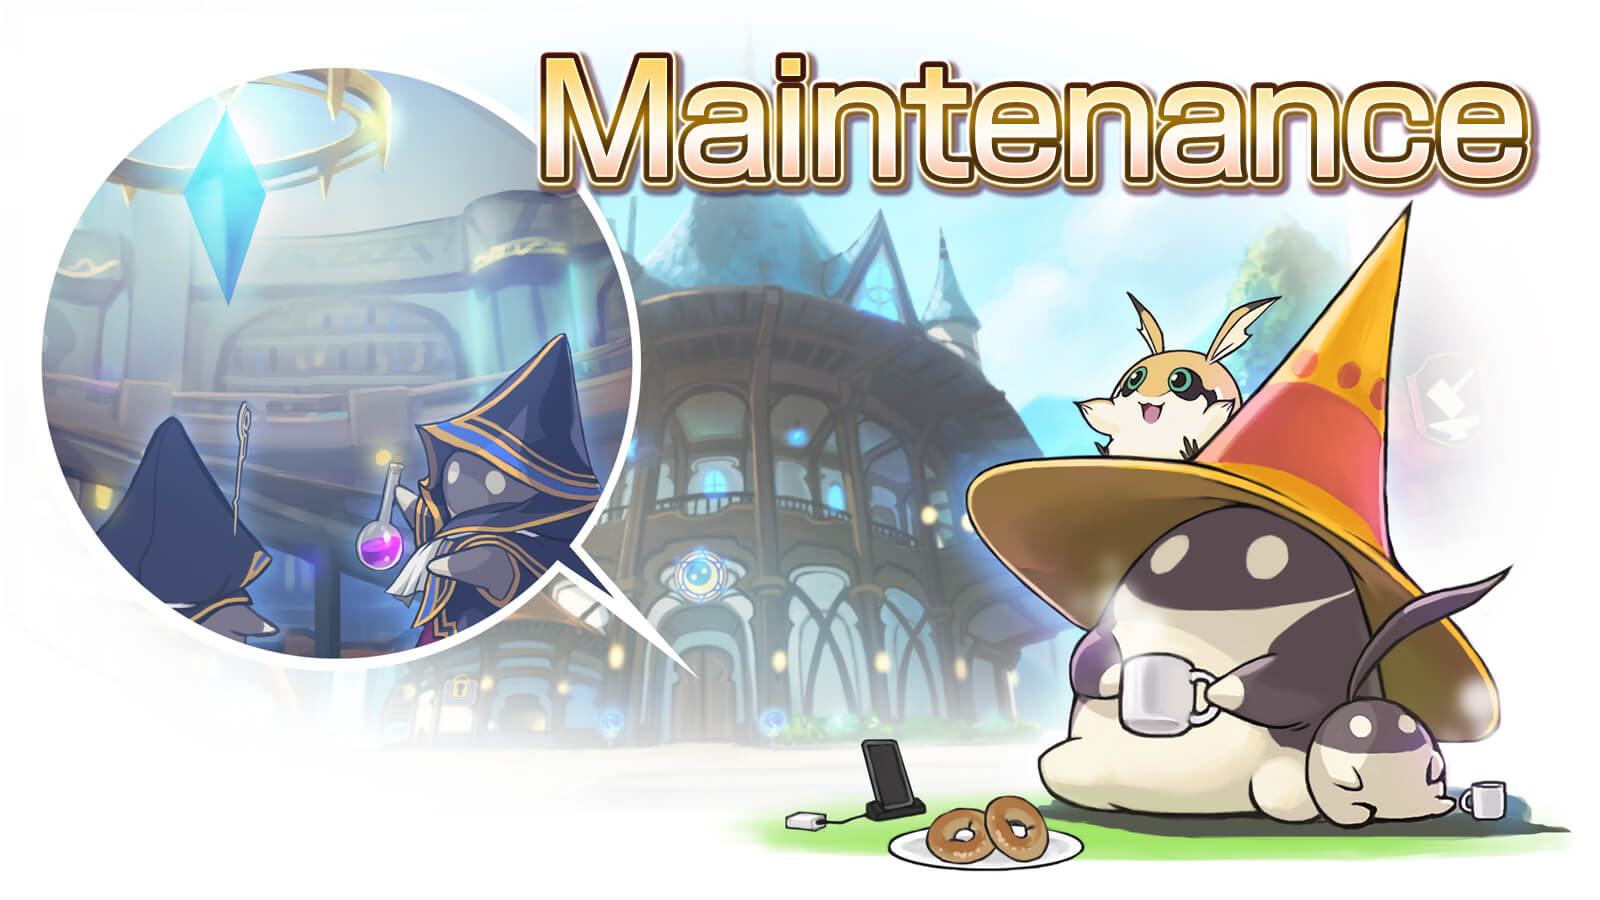 [Completed] Maintenance Notice: Feb 7, 14:00 - 15:00